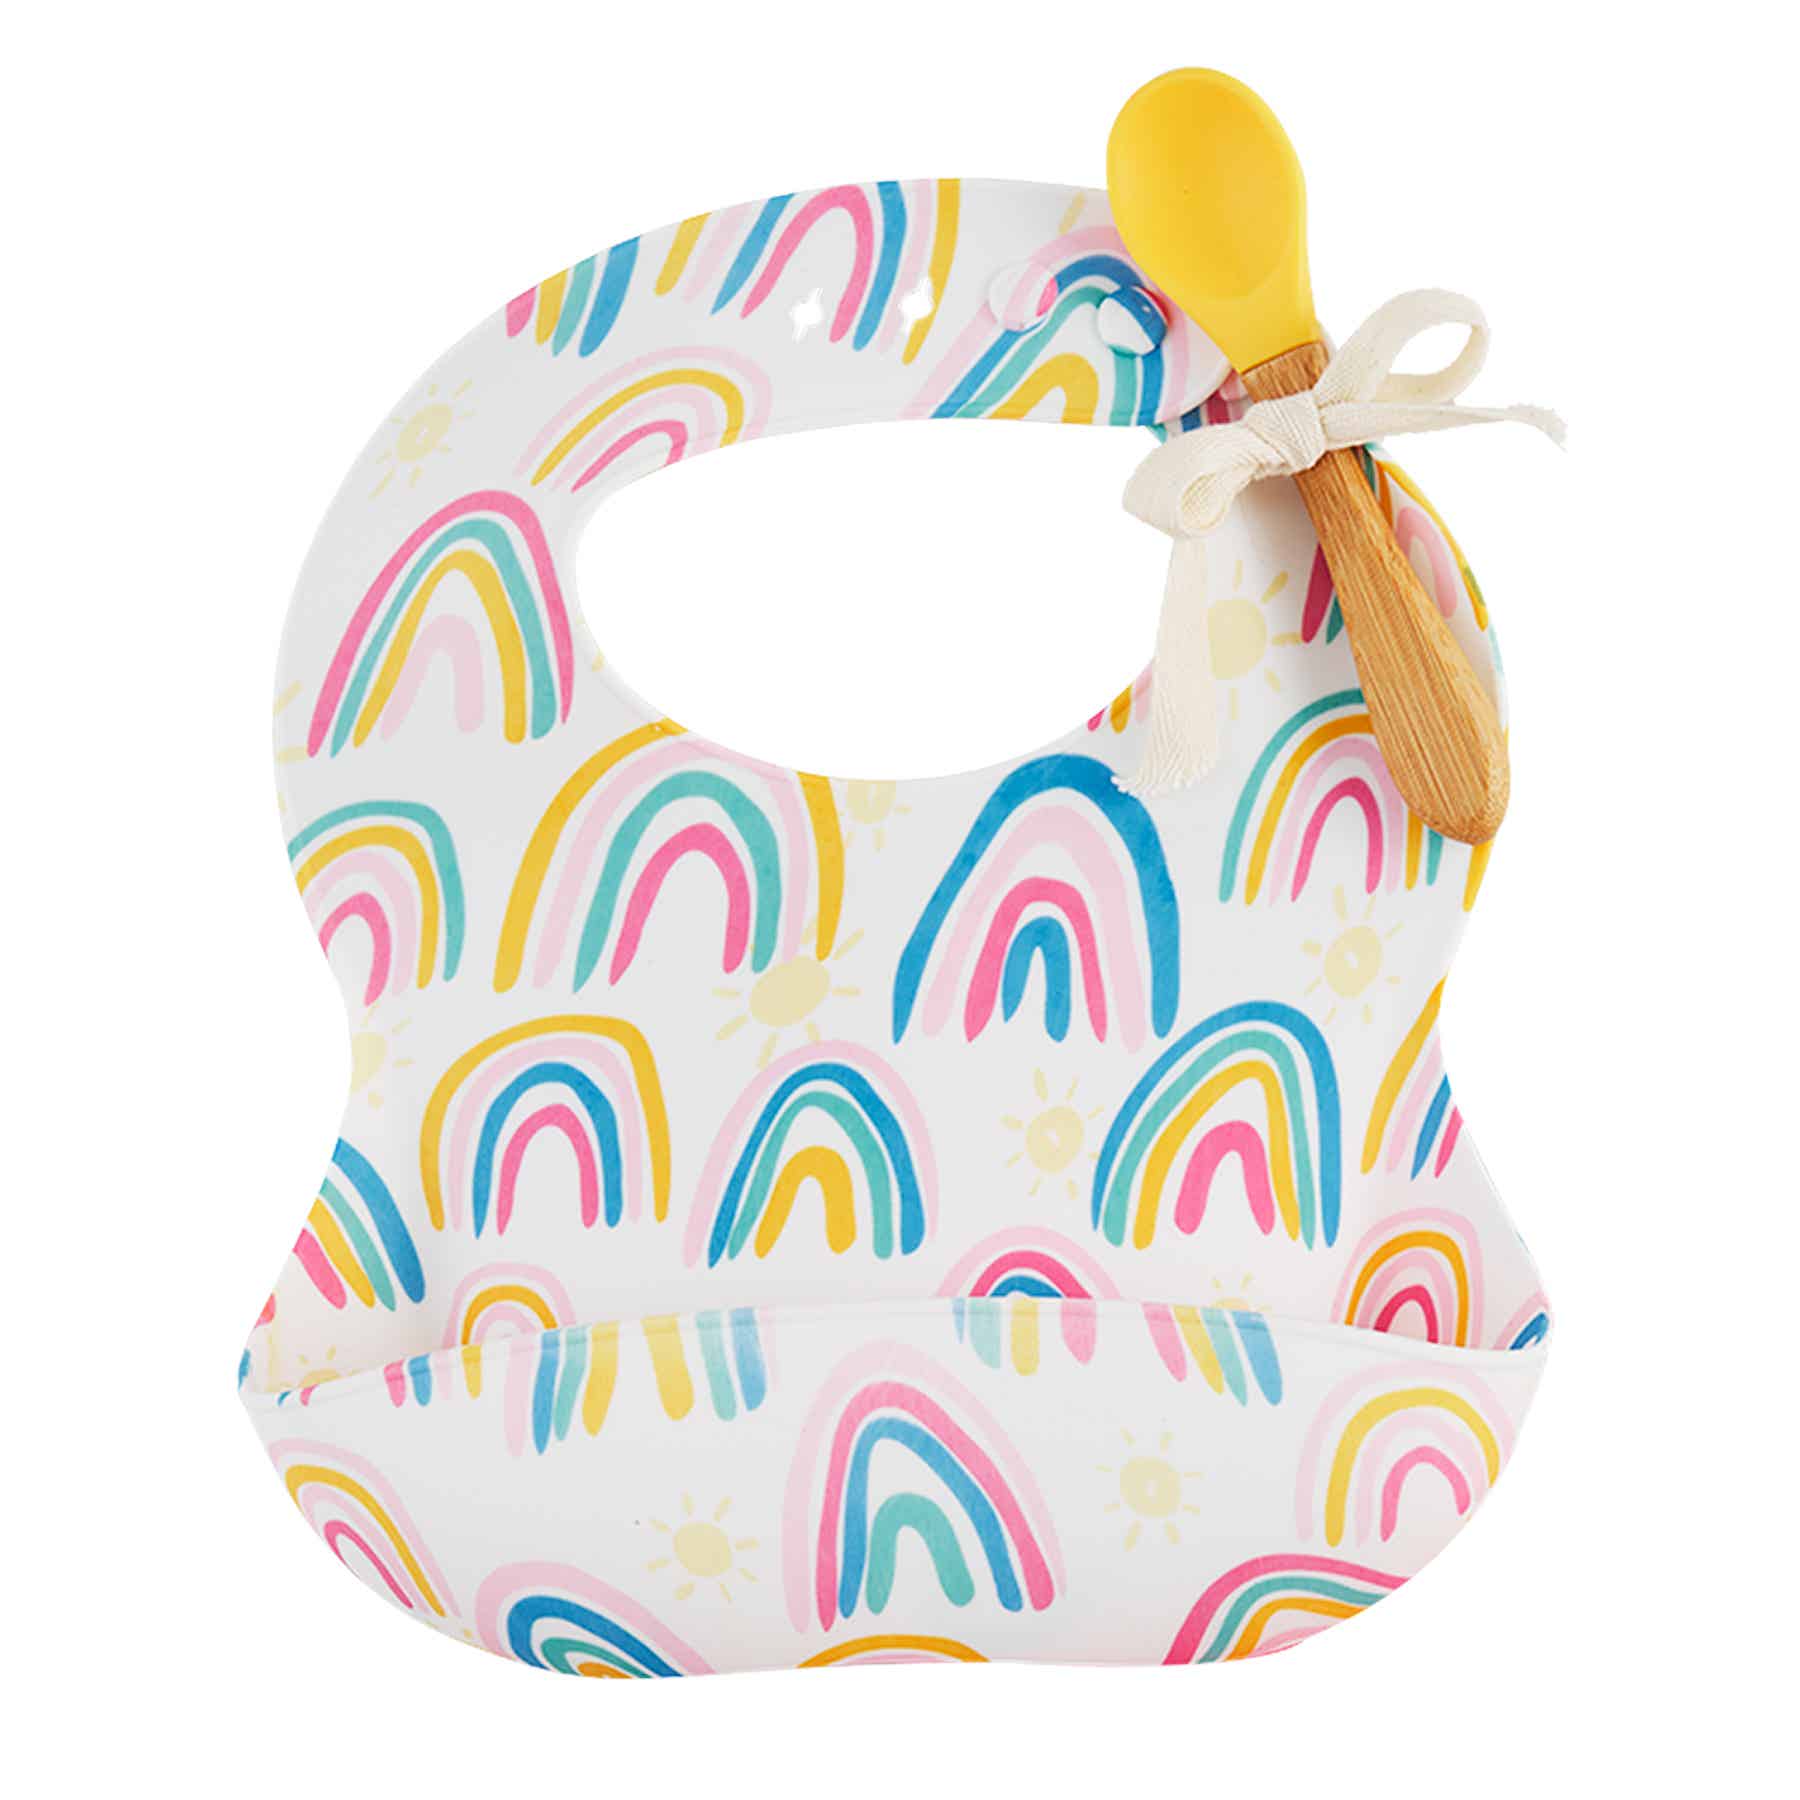 pink silicone bib with pocket on the front, an all-over rainbow design, and wooden spoon with silicone head tied to it.